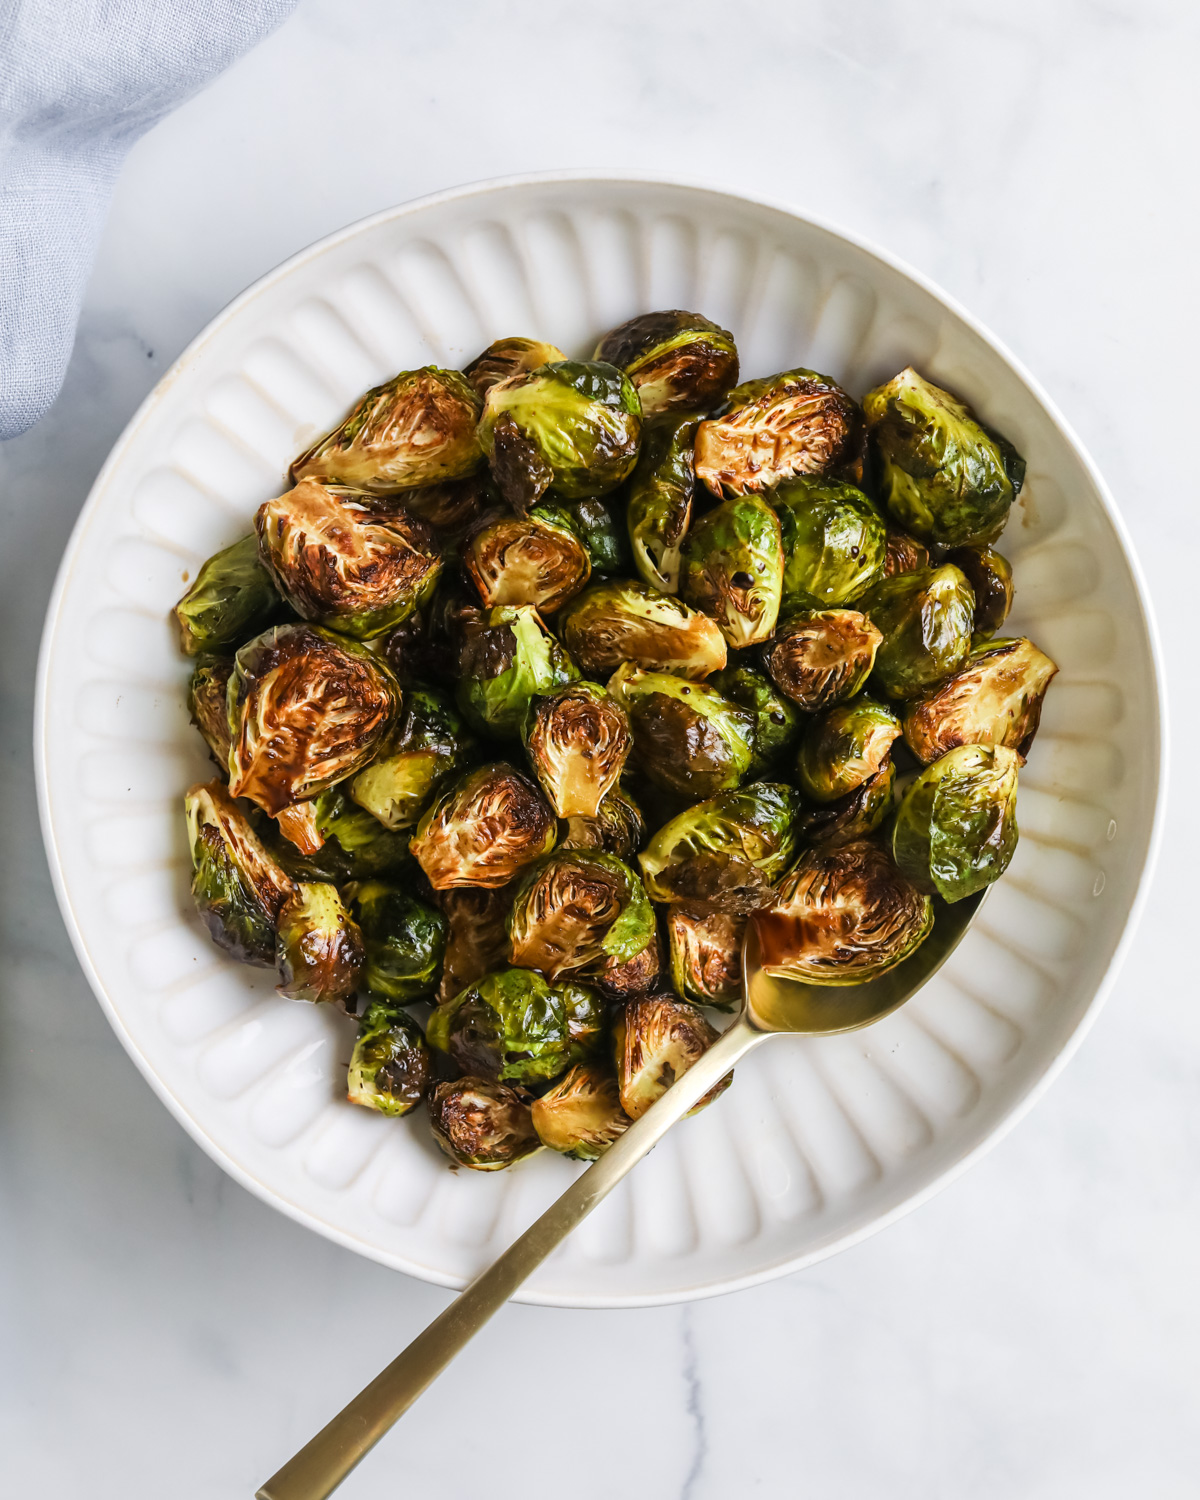 Balsamic brussels sprouts with honey.